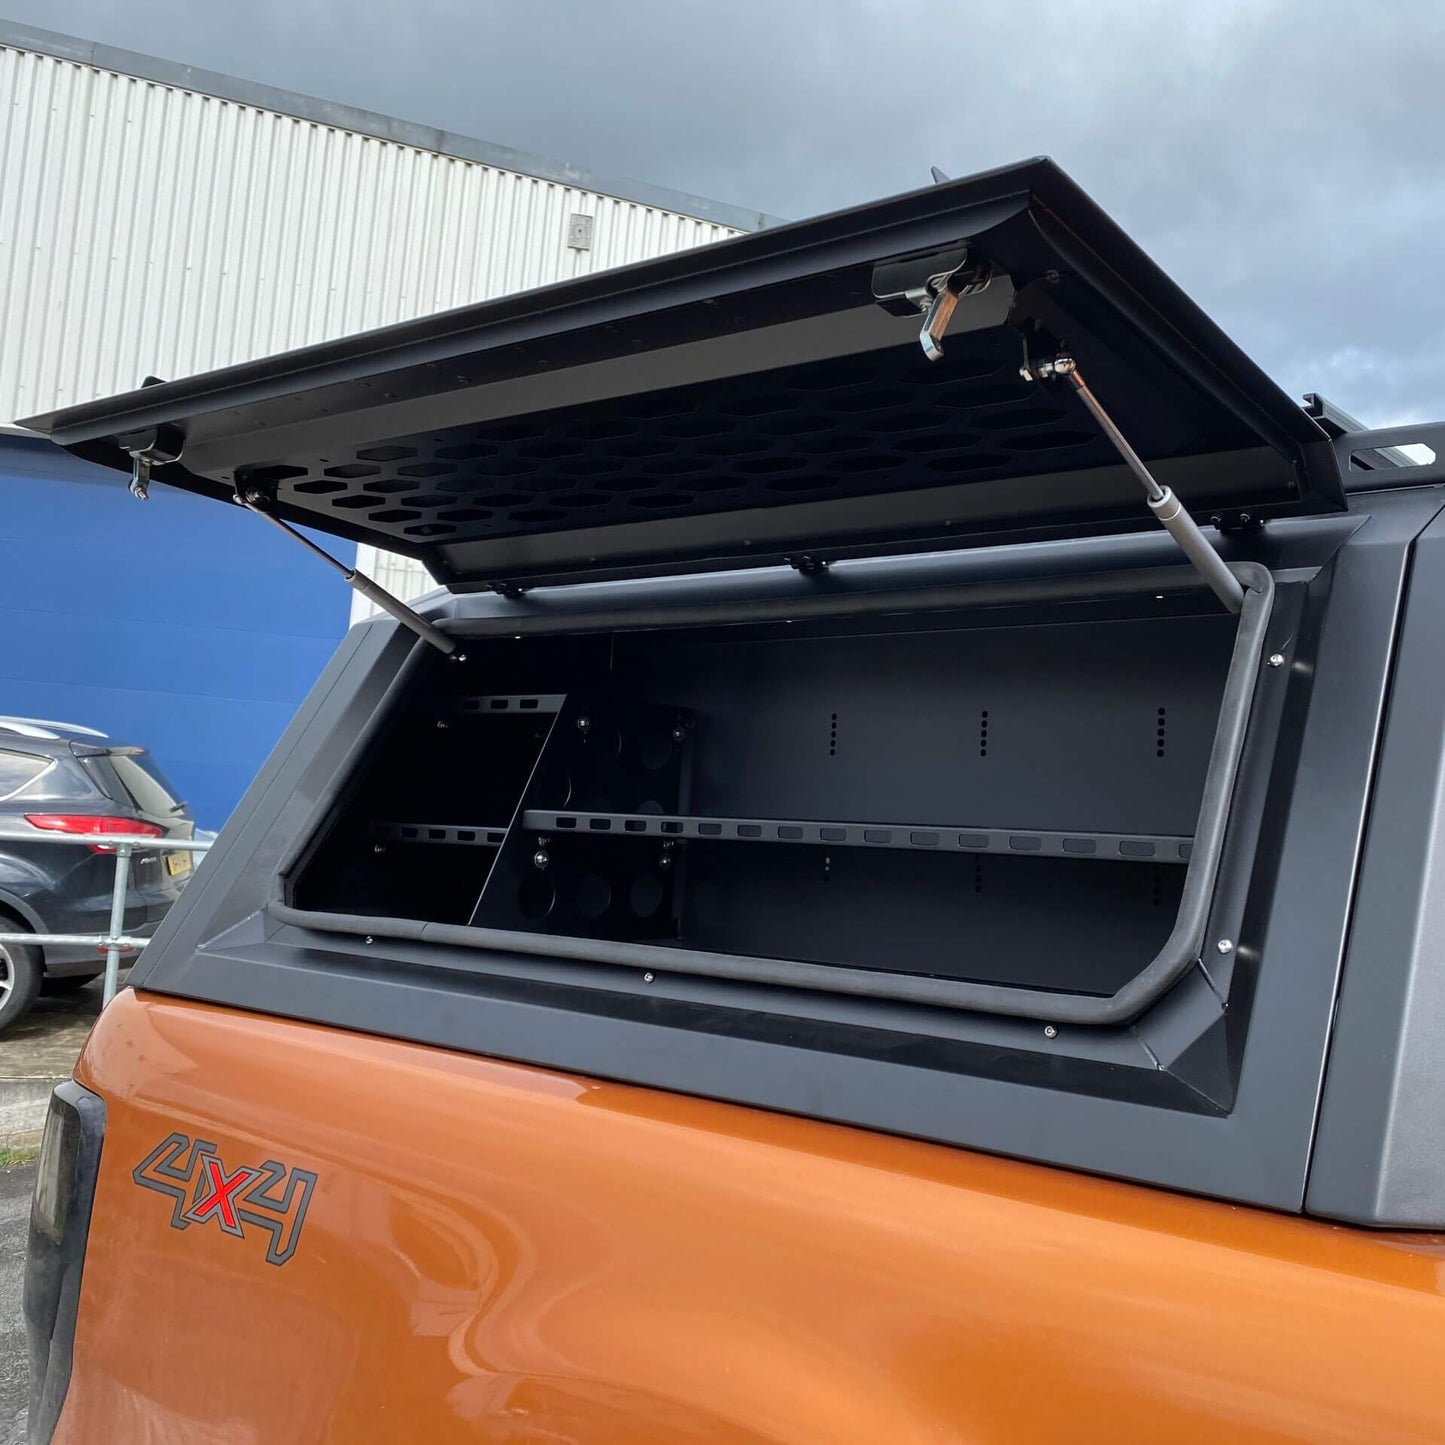 Aluminium Pickup Load Bed Canopy Shelf Insert for the Toyota Hilux 2016+